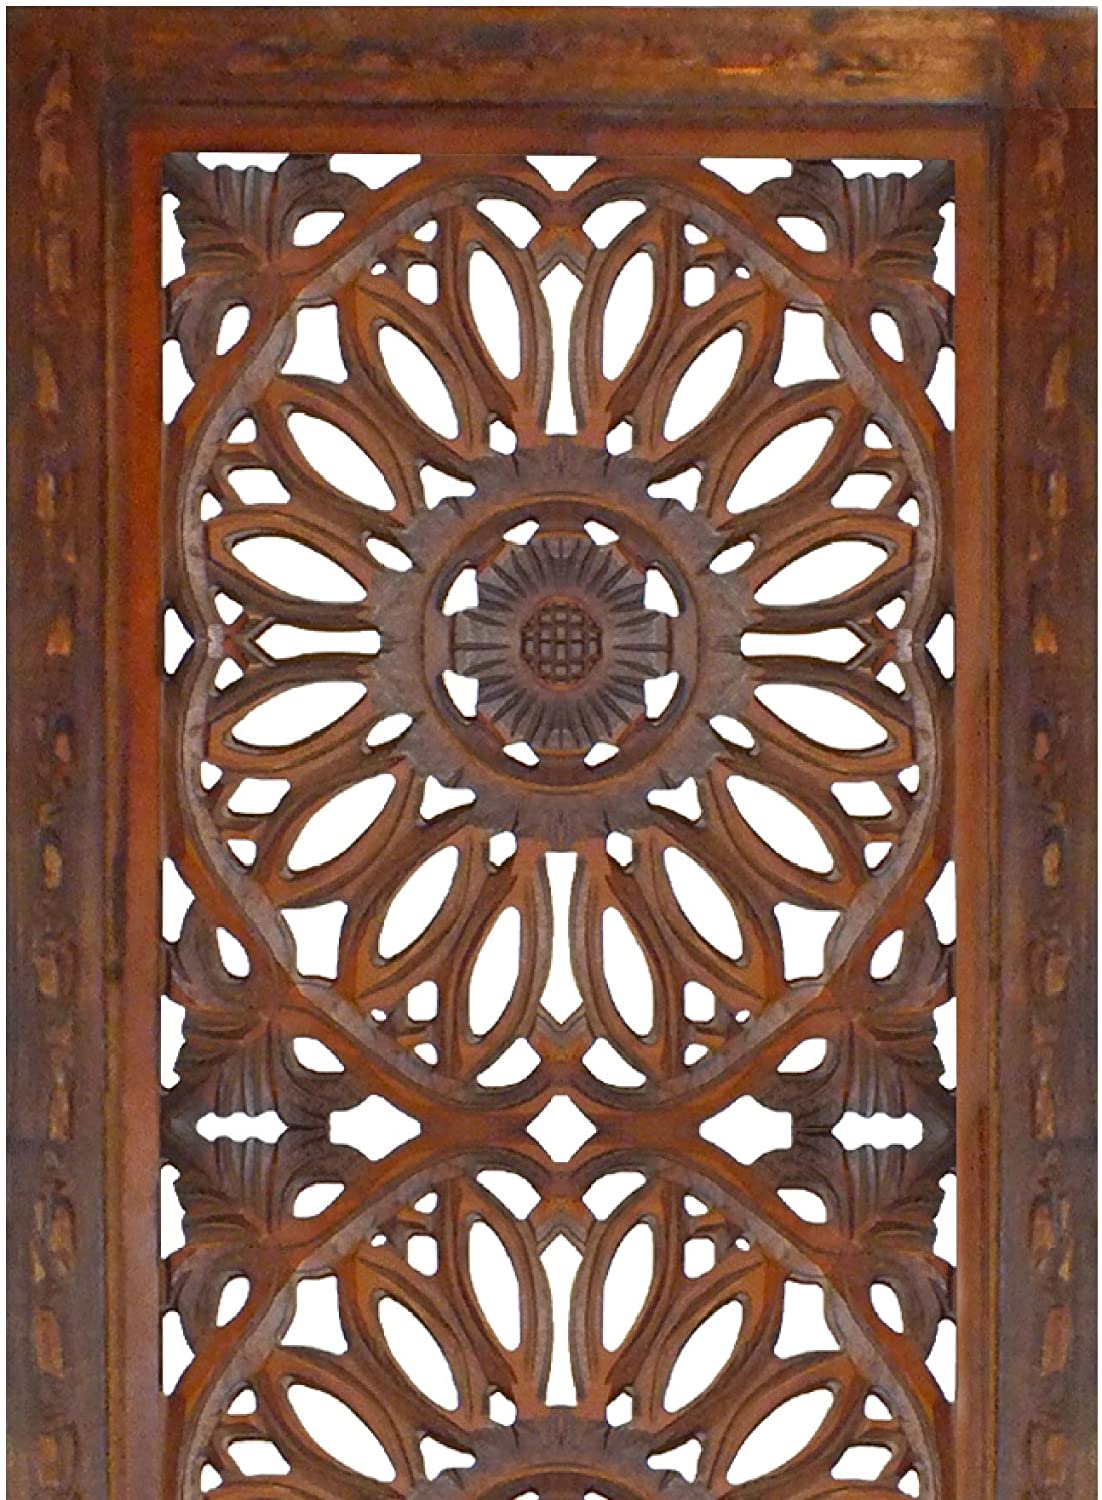 2 Piece Mango Wood Wall Panel Set with Mendallion Carving, Rectangle, Burnt Brown